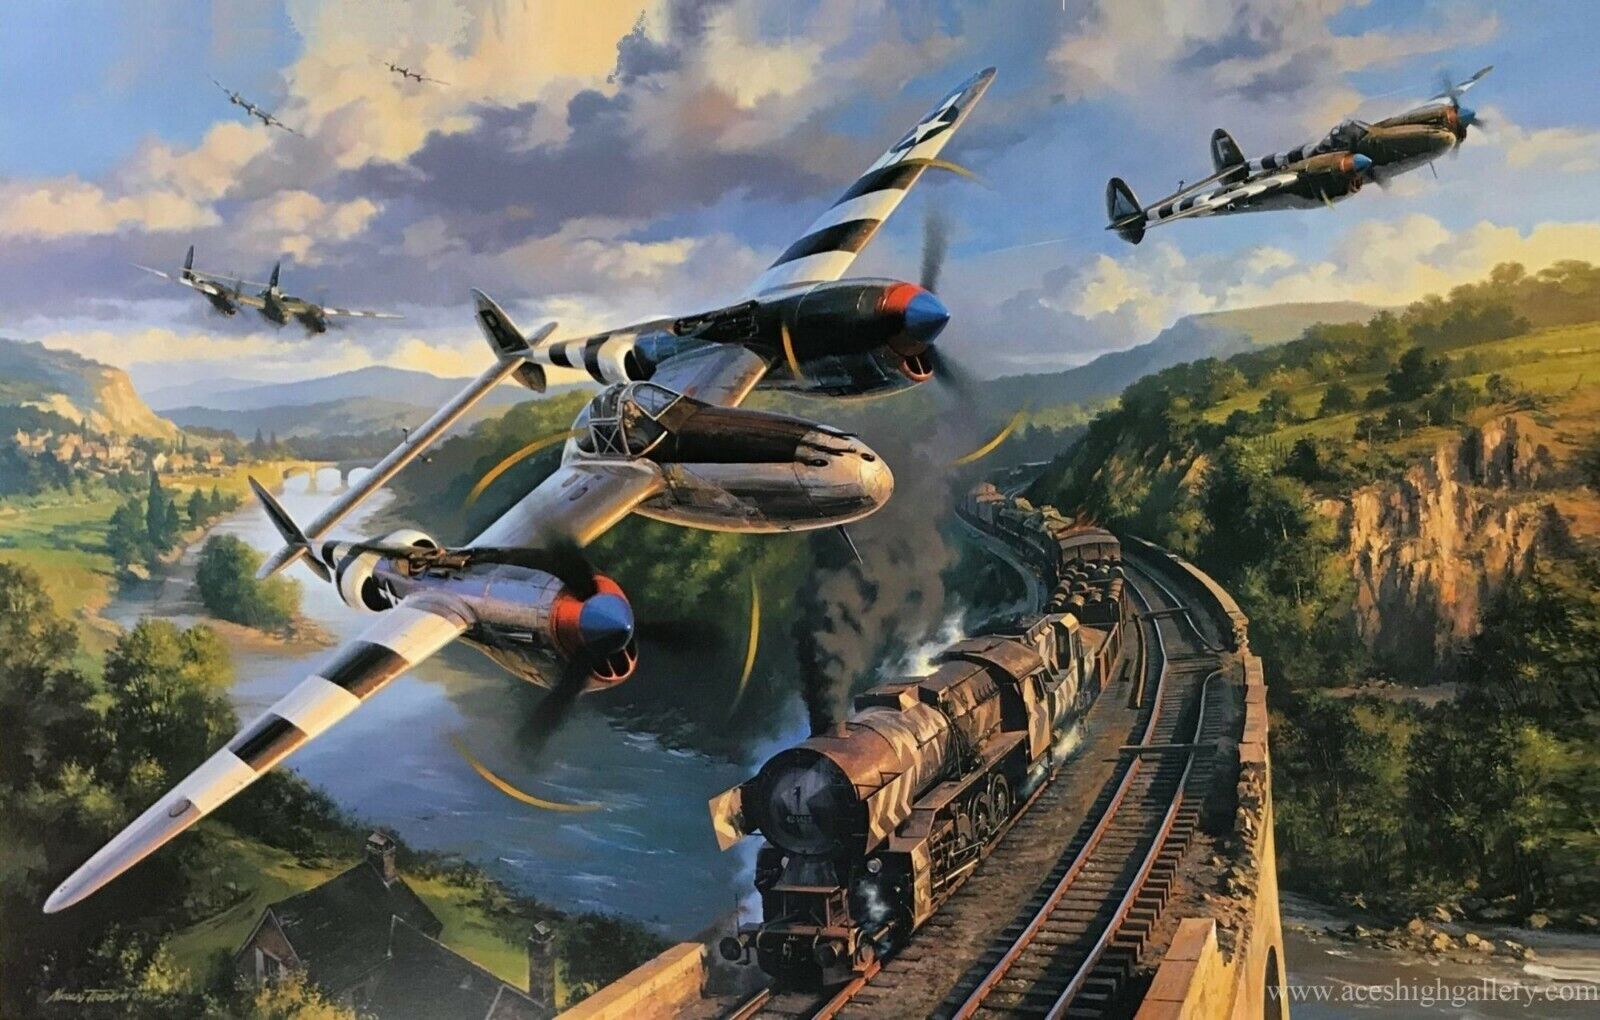 Lightning Encounter by Nicolas Trudgian Signed by four D-Day P-38 Pilots